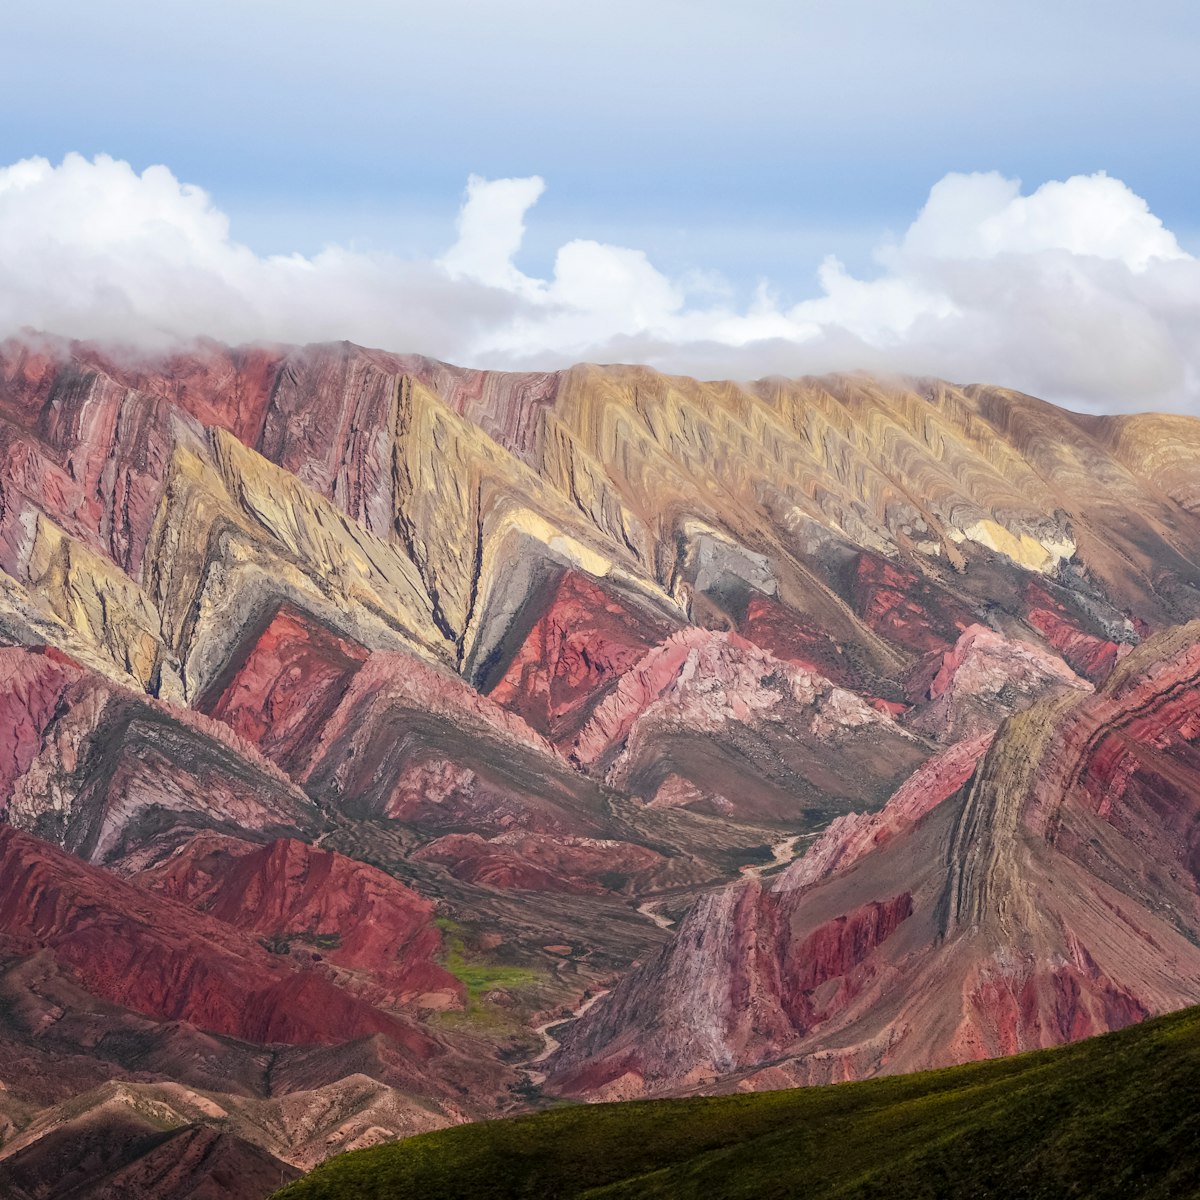 Serranias del Hornocal, wide colored mountains, Argentina; Shutterstock ID 670687489; your: Sloane Tucker; gl: 65050; netsuite: Online Editorial; full: POI
670687489